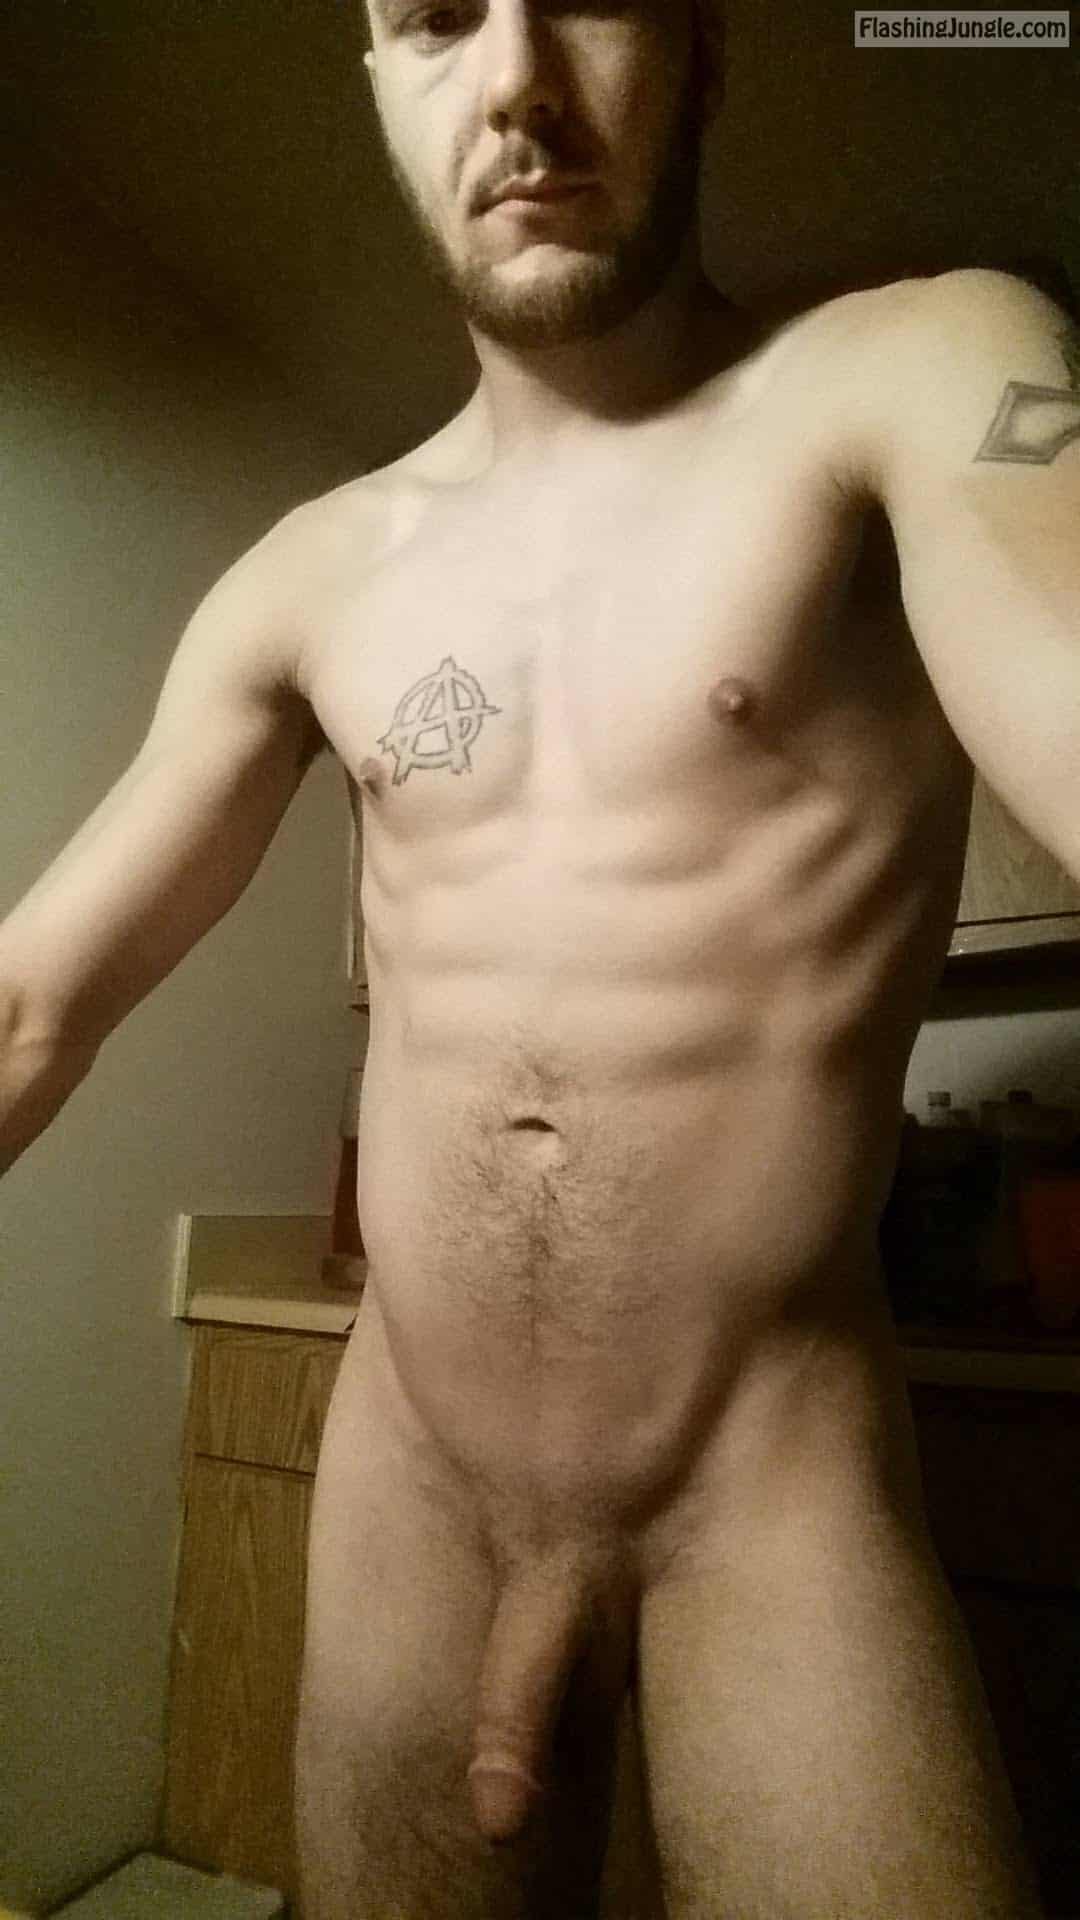 Real Amateurs Dick Flash Pics  : Would anyone want to suck my dick? Im always horny You want this dick?